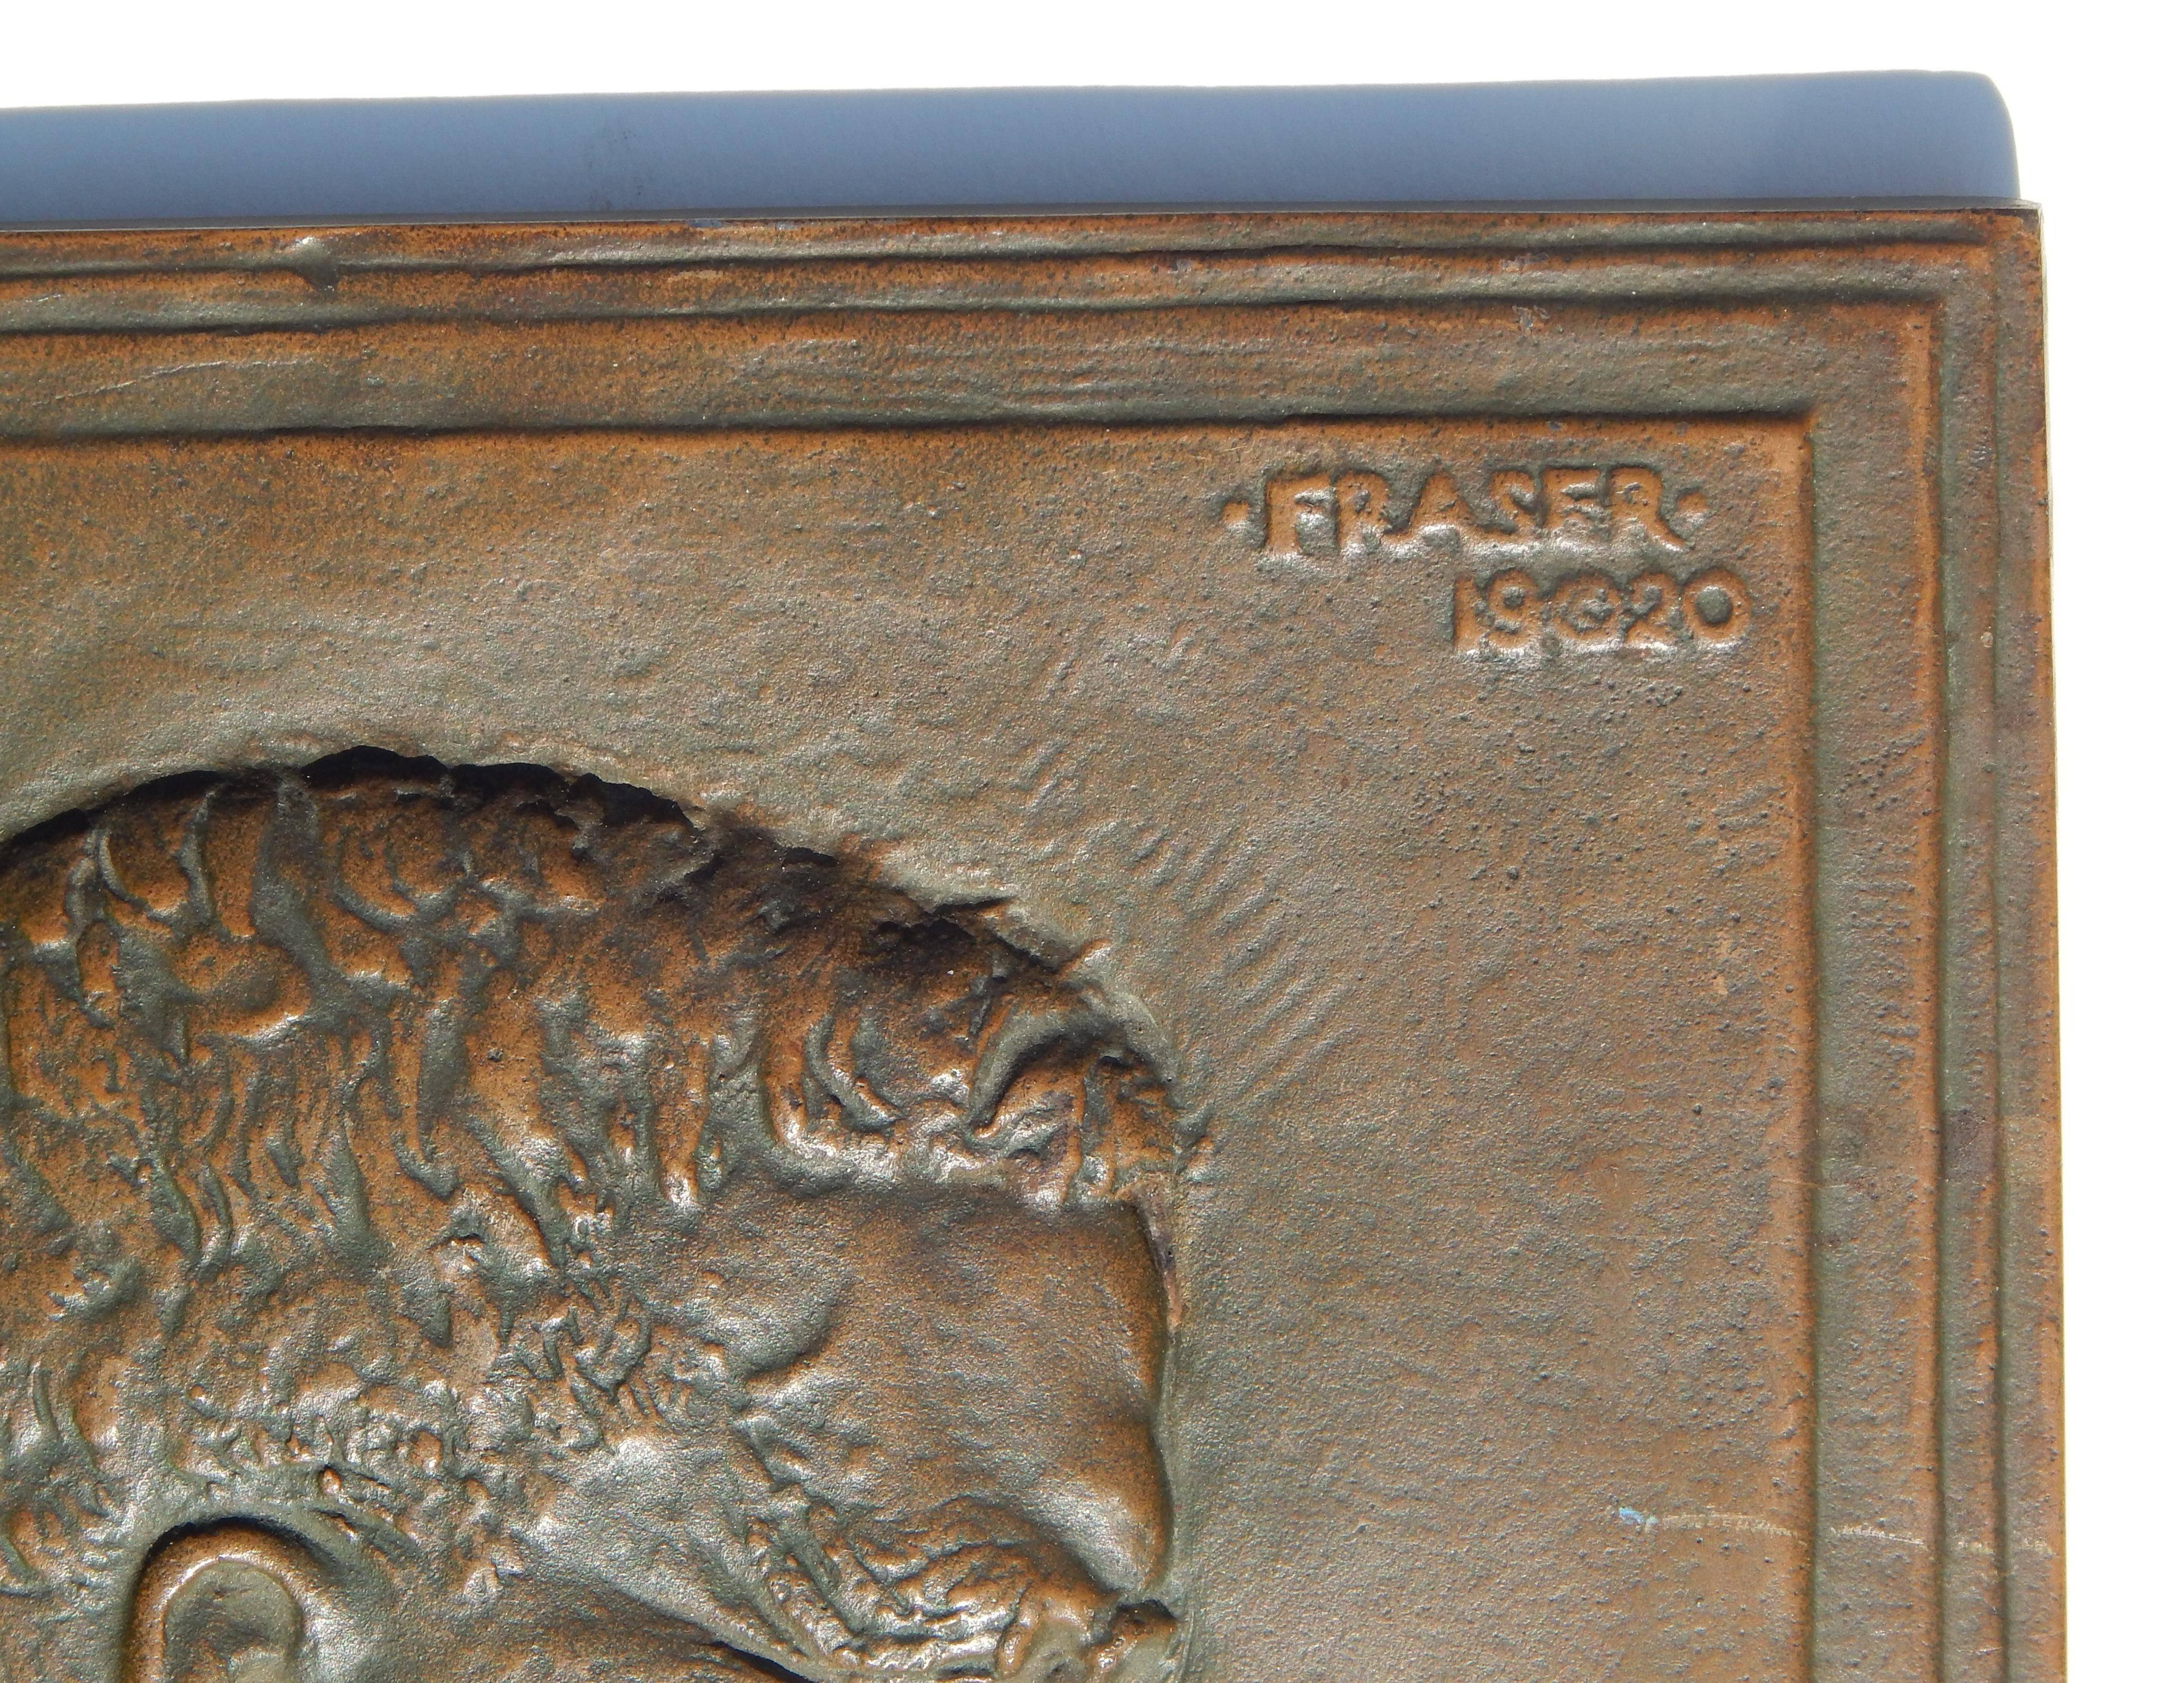 Bronze plaque of the famous president Roosevelt by Coin Designer and
sculptor James Earle Fraser (1876-1953).
In excellent condition measuring 13 x 10 x 1/2 inches.
Lower part reads:
Aggressive Fighting for the Right is the Noblest Sport the